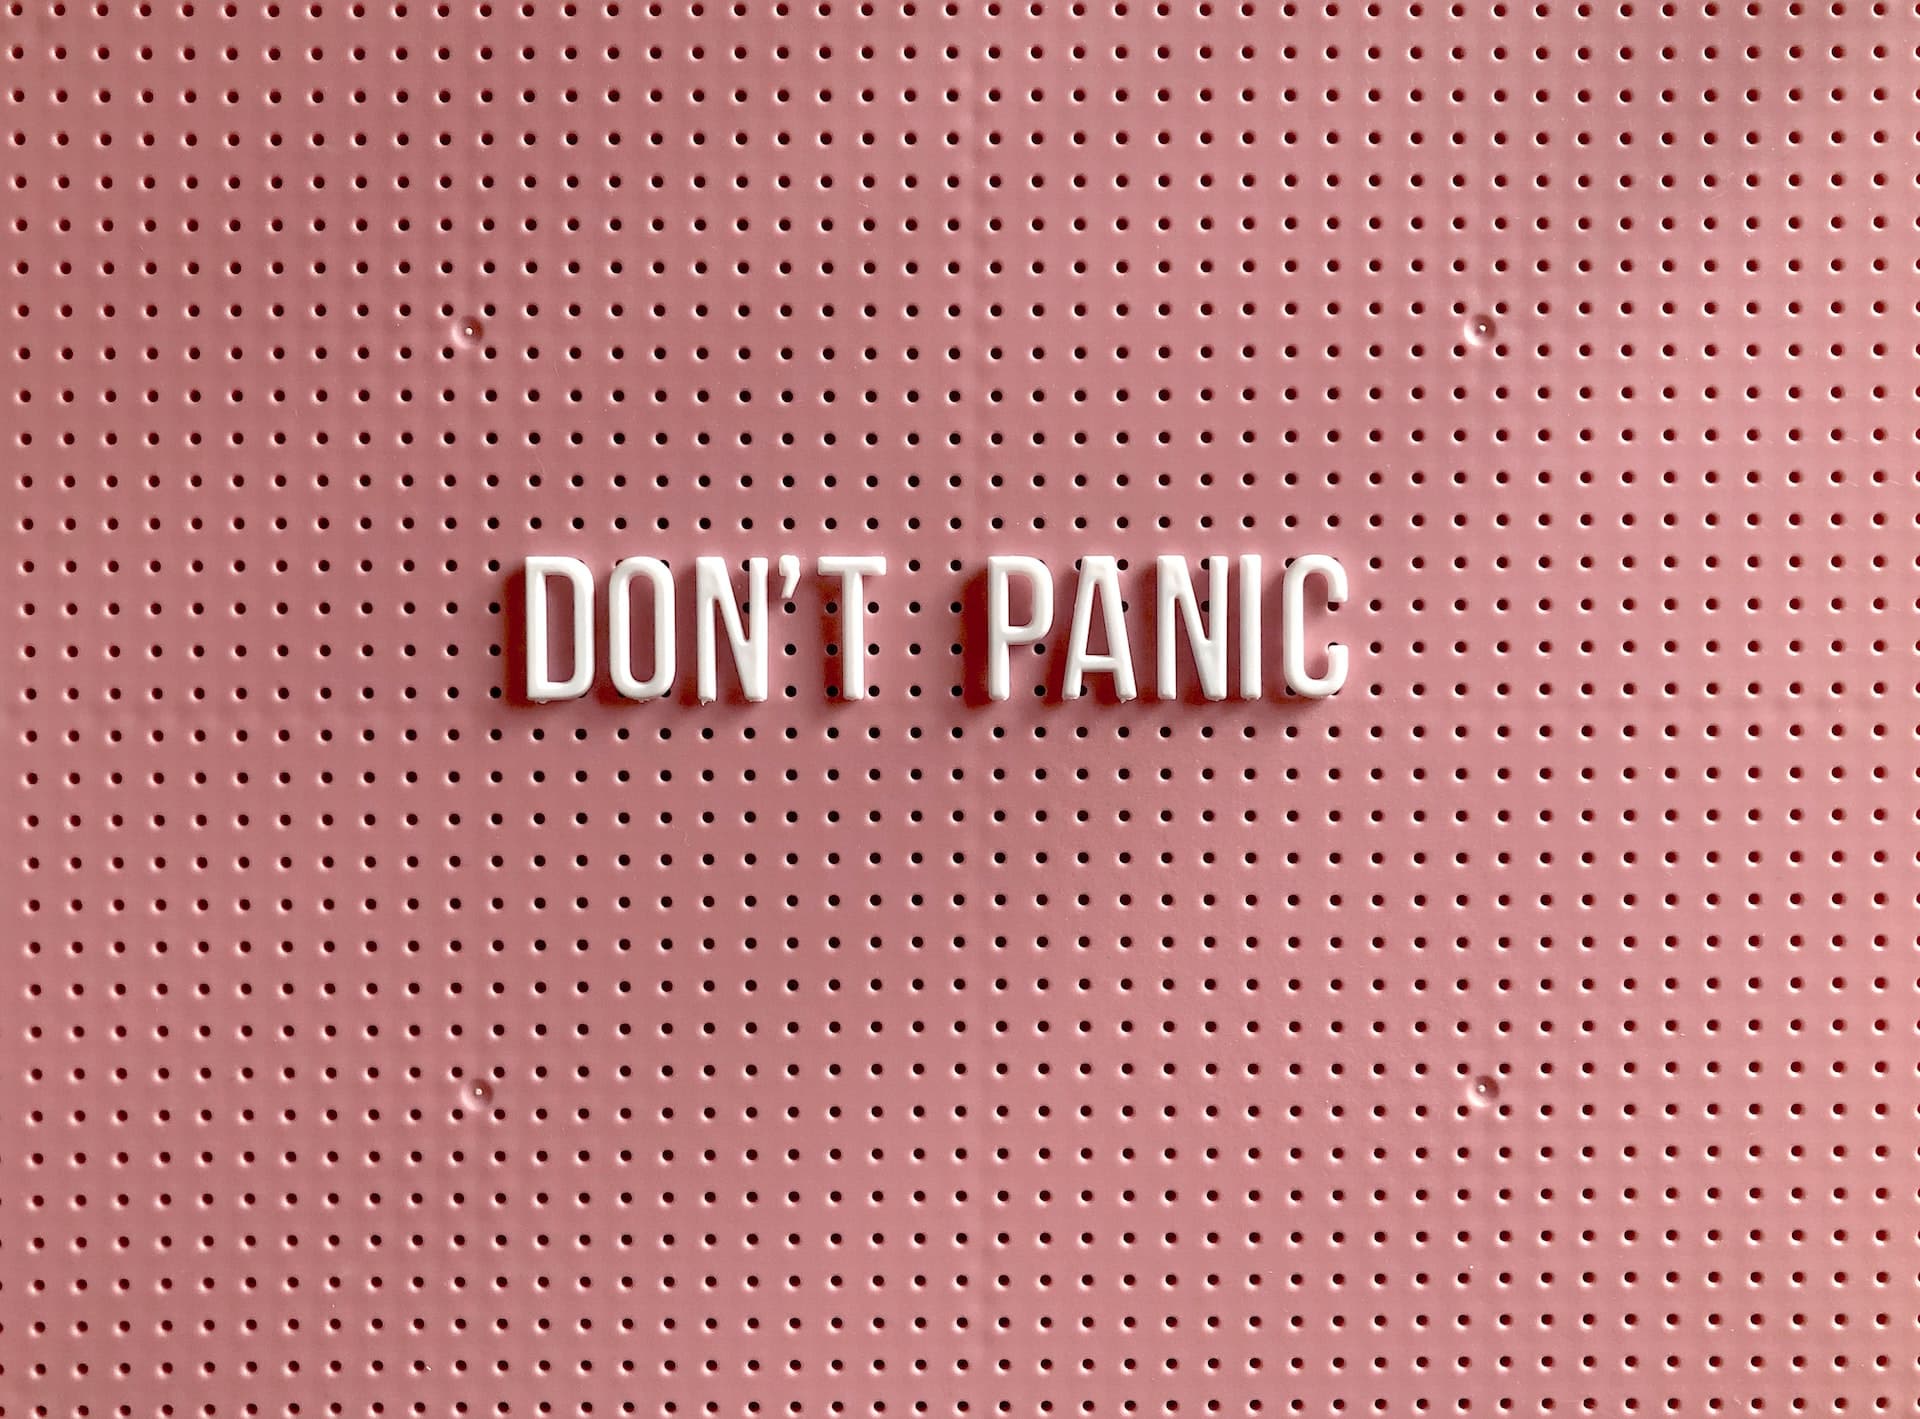 Don't Panic on a pink background